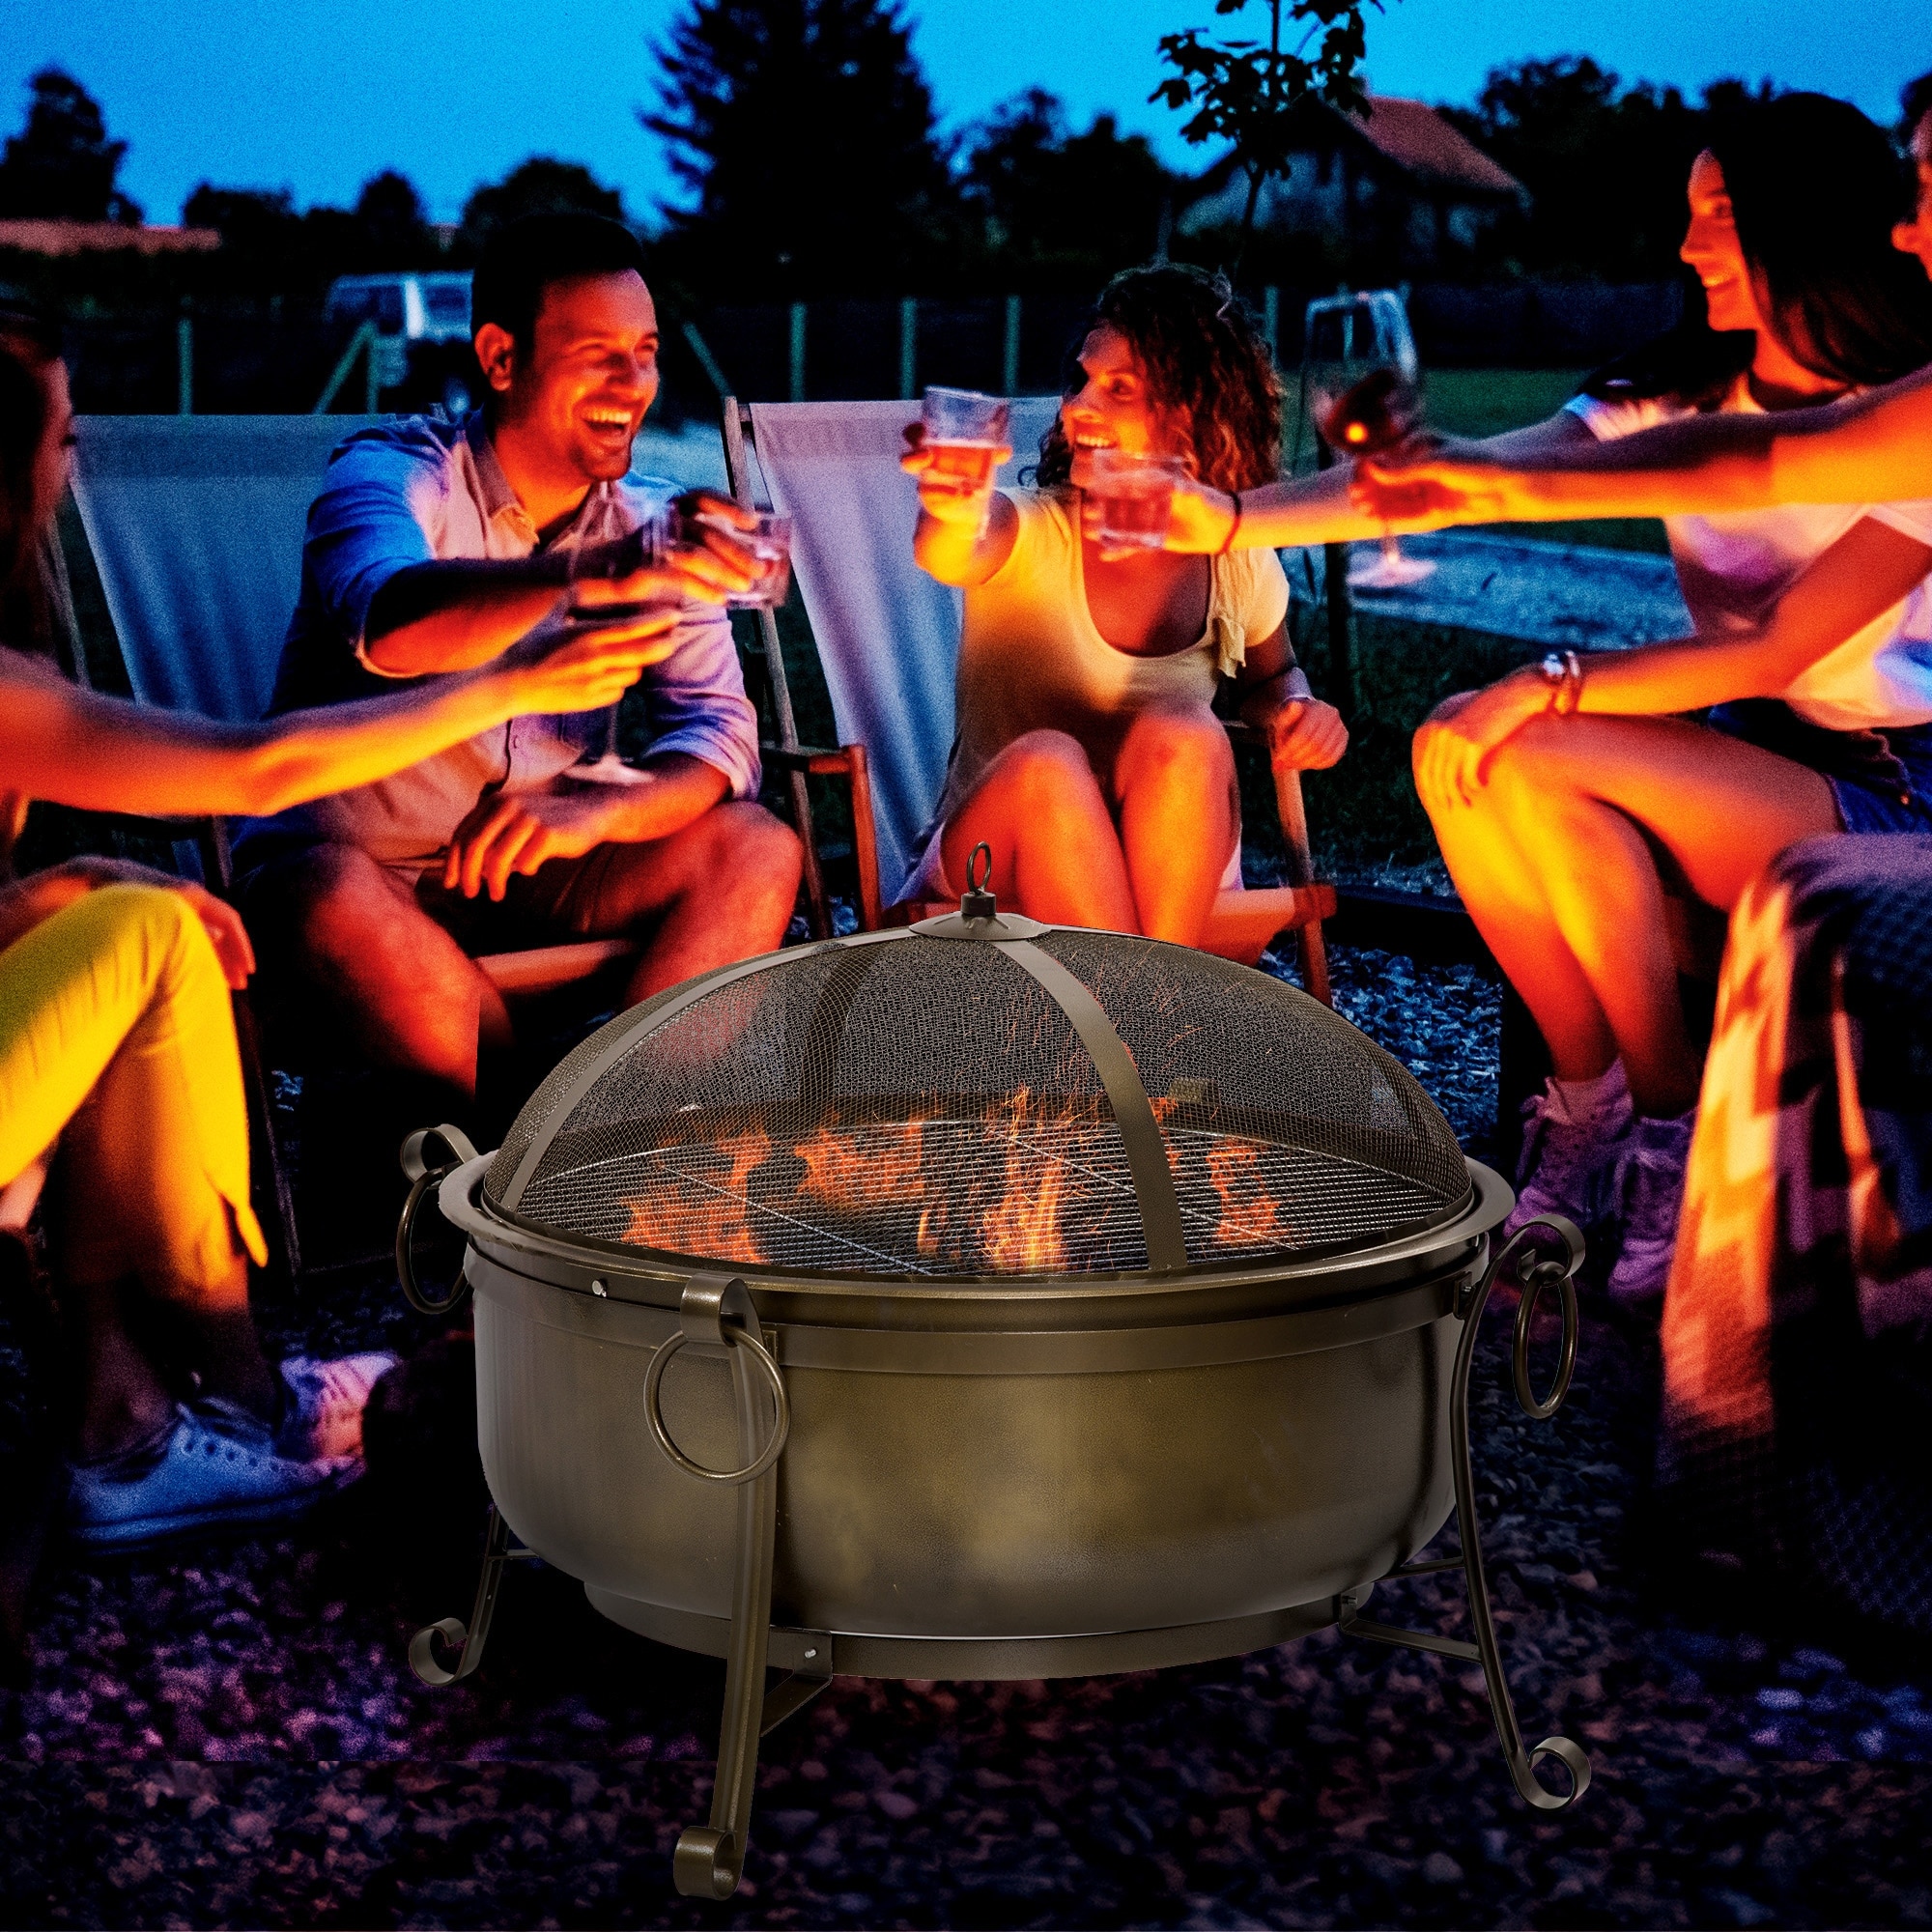 Outsunny 2-in-1 Outdoor Fire Pit with BBQ Grill, 37 Inch Patio Heater Log Wood Charcoal Burner with Spark Screen Cover, Poker